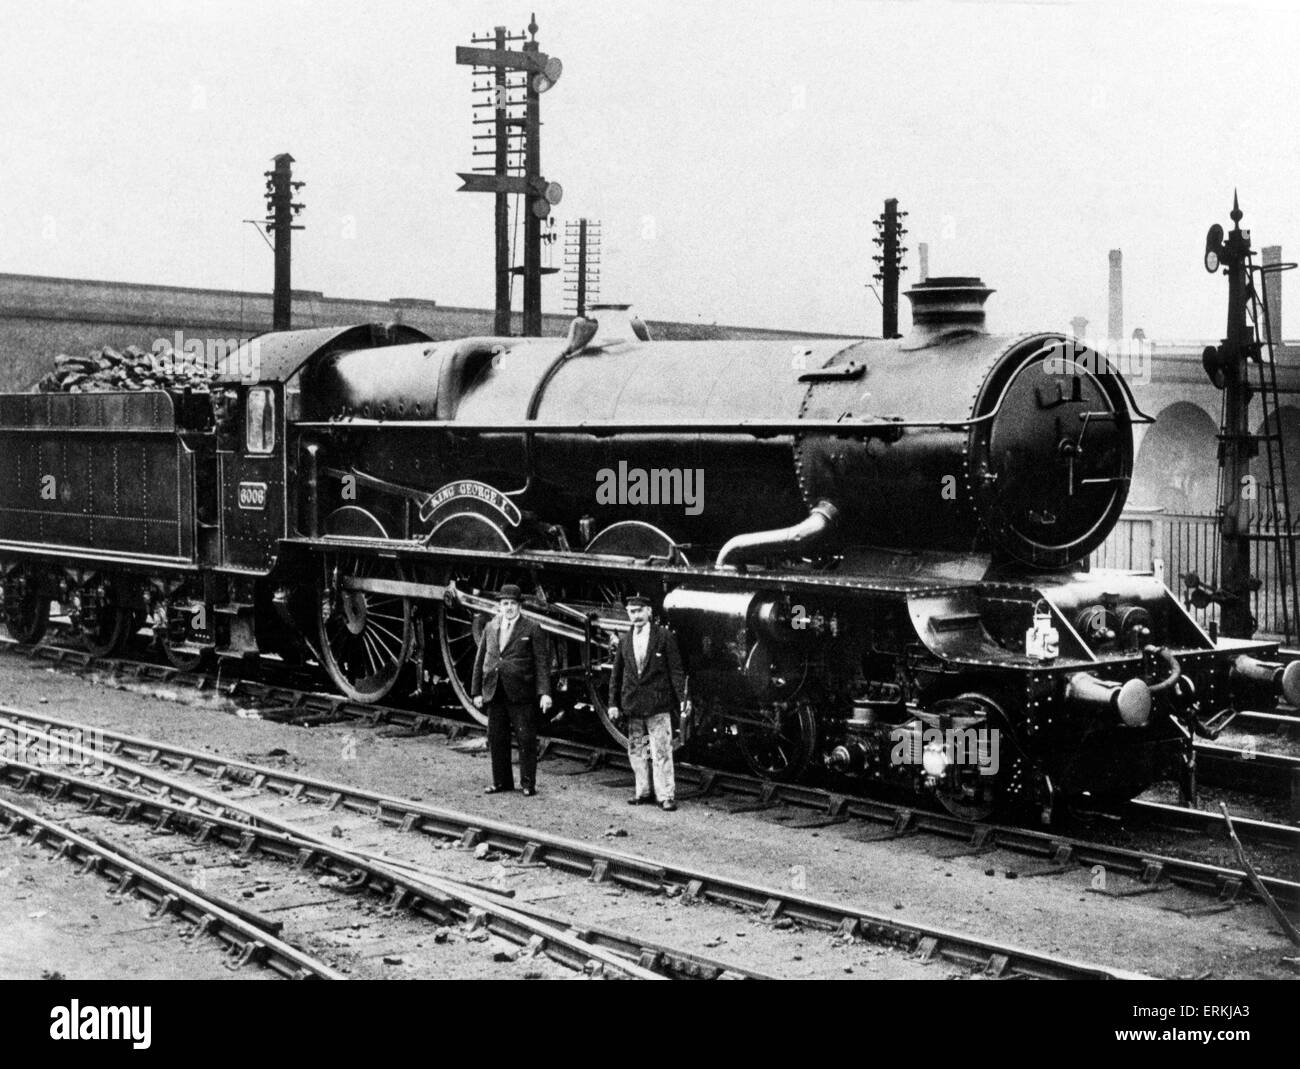 Great Western Railway (GWR) 6000 Le Roi George I Classe locomotive à vapeur, chemin Stafford cabanes, vers 1930. Banque D'Images